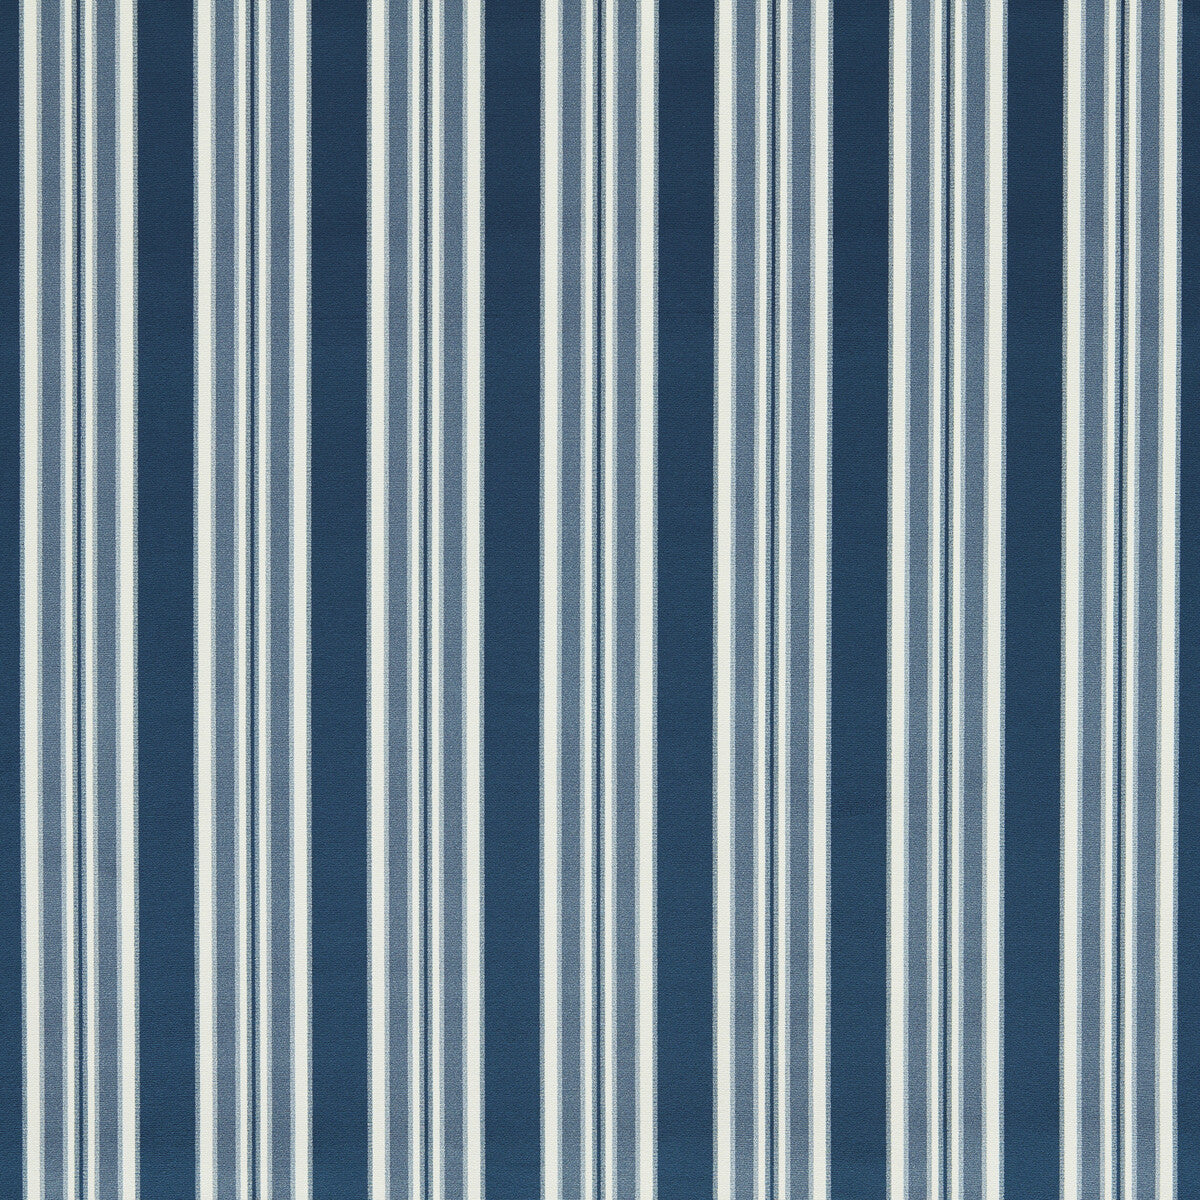 Wilmott fabric in indigo color - pattern F1691/05.CAC.0 - by Clarke And Clarke in the Whitworth collection